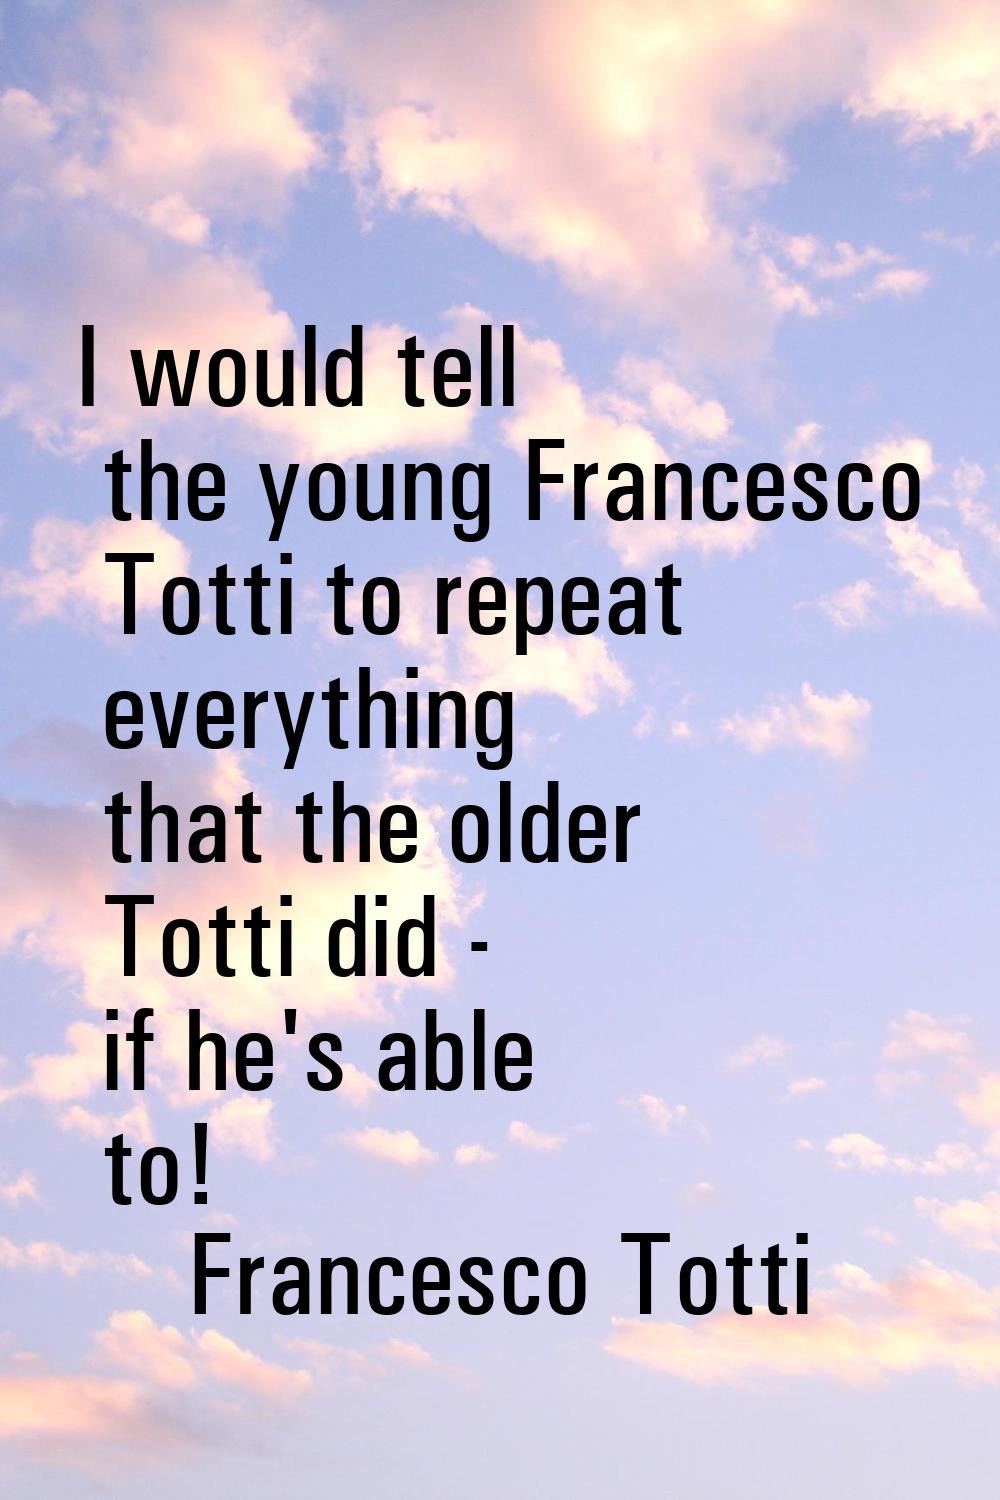 I would tell the young Francesco Totti to repeat everything that the older Totti did - if he's able